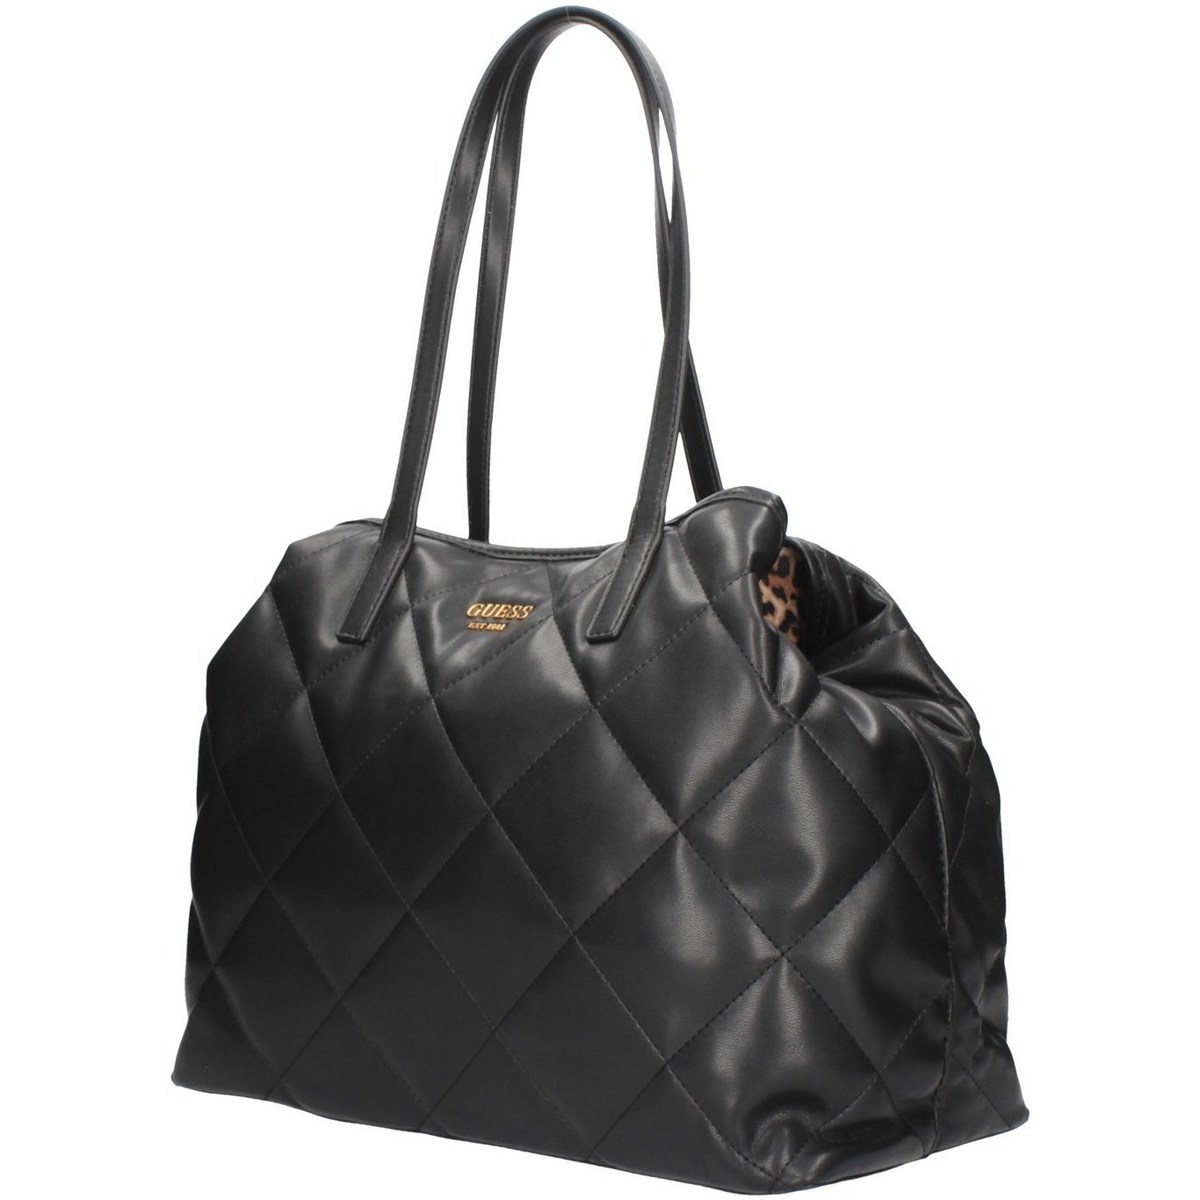 Guess VIKKY LARGE TOTE